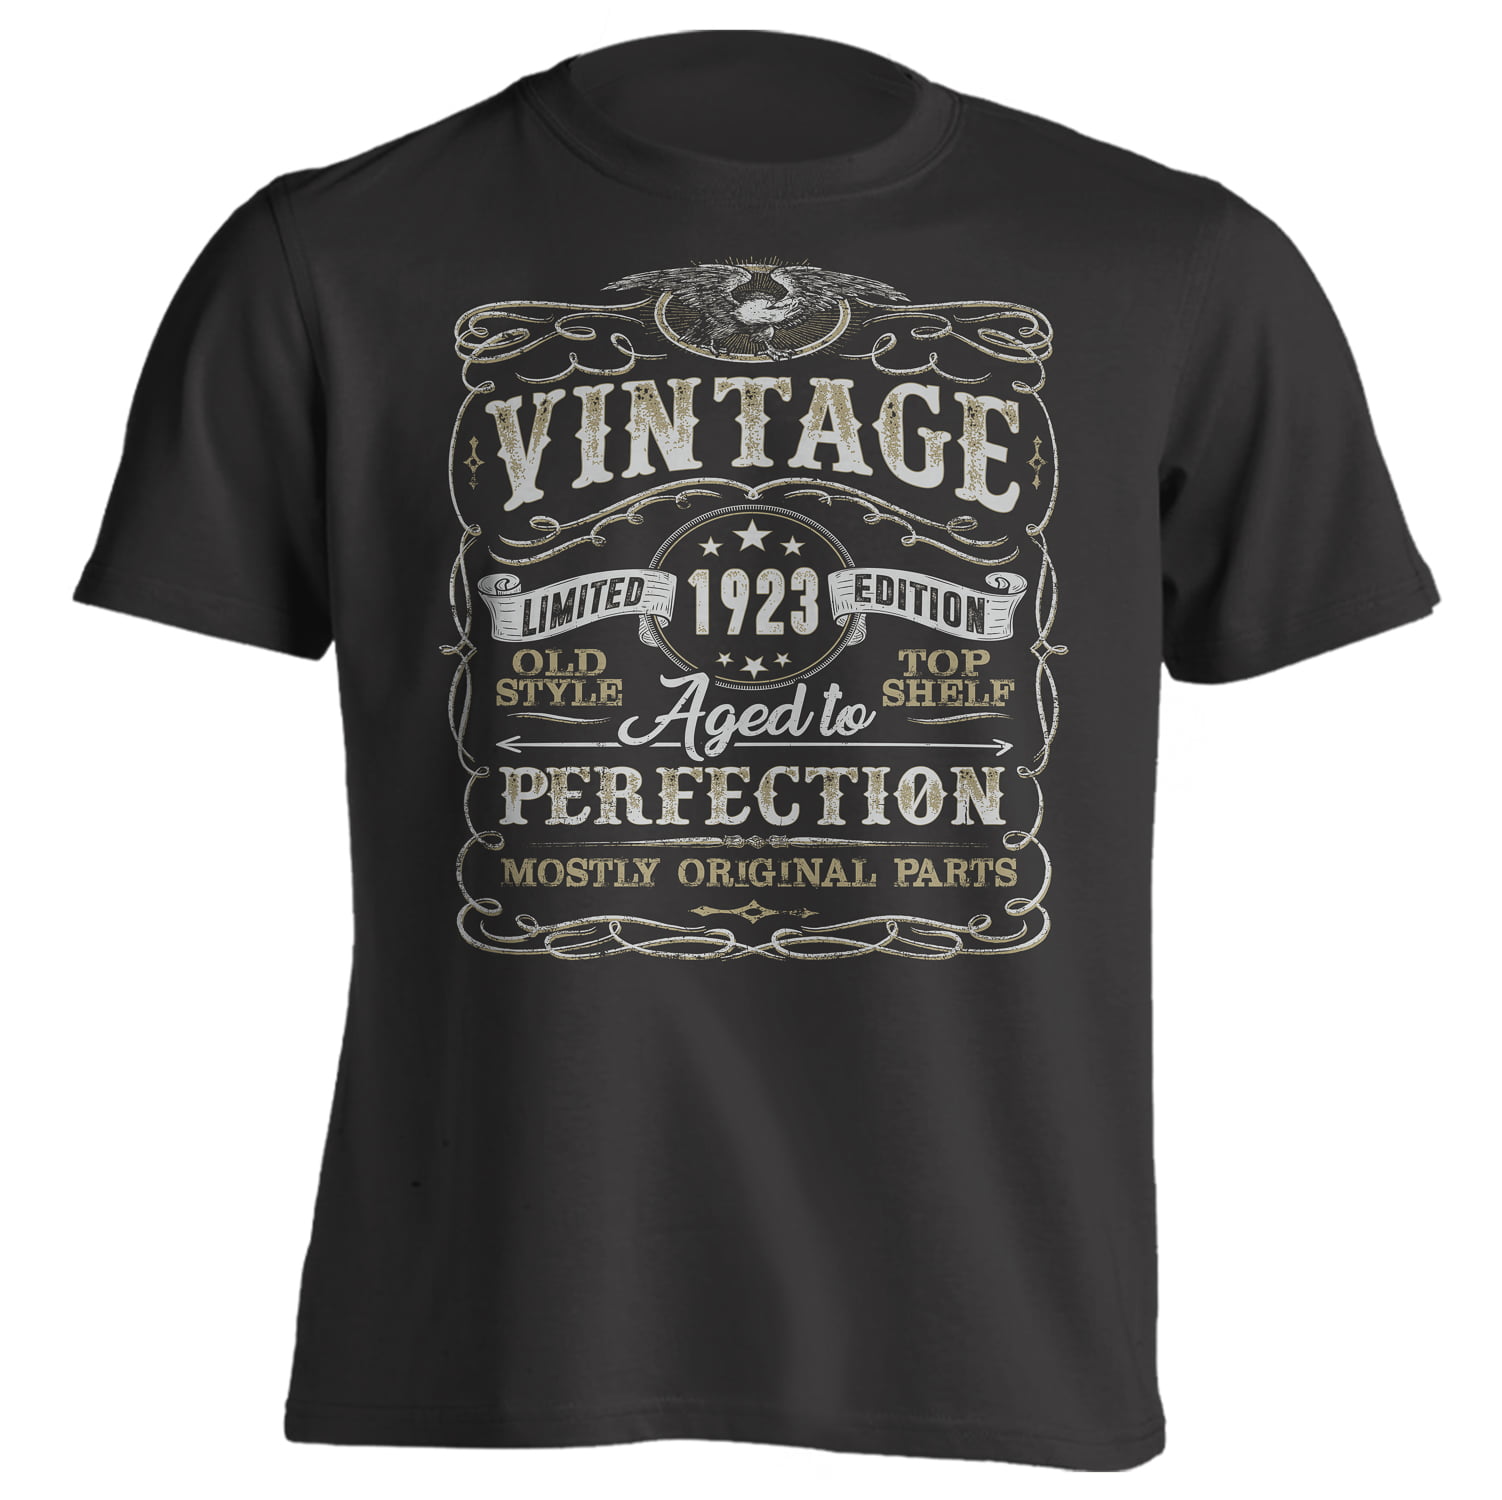 VINTAGE 1961 AGED TO PERFECTION Birth Year /Birthday Gift Themed Men's T-Shirt 